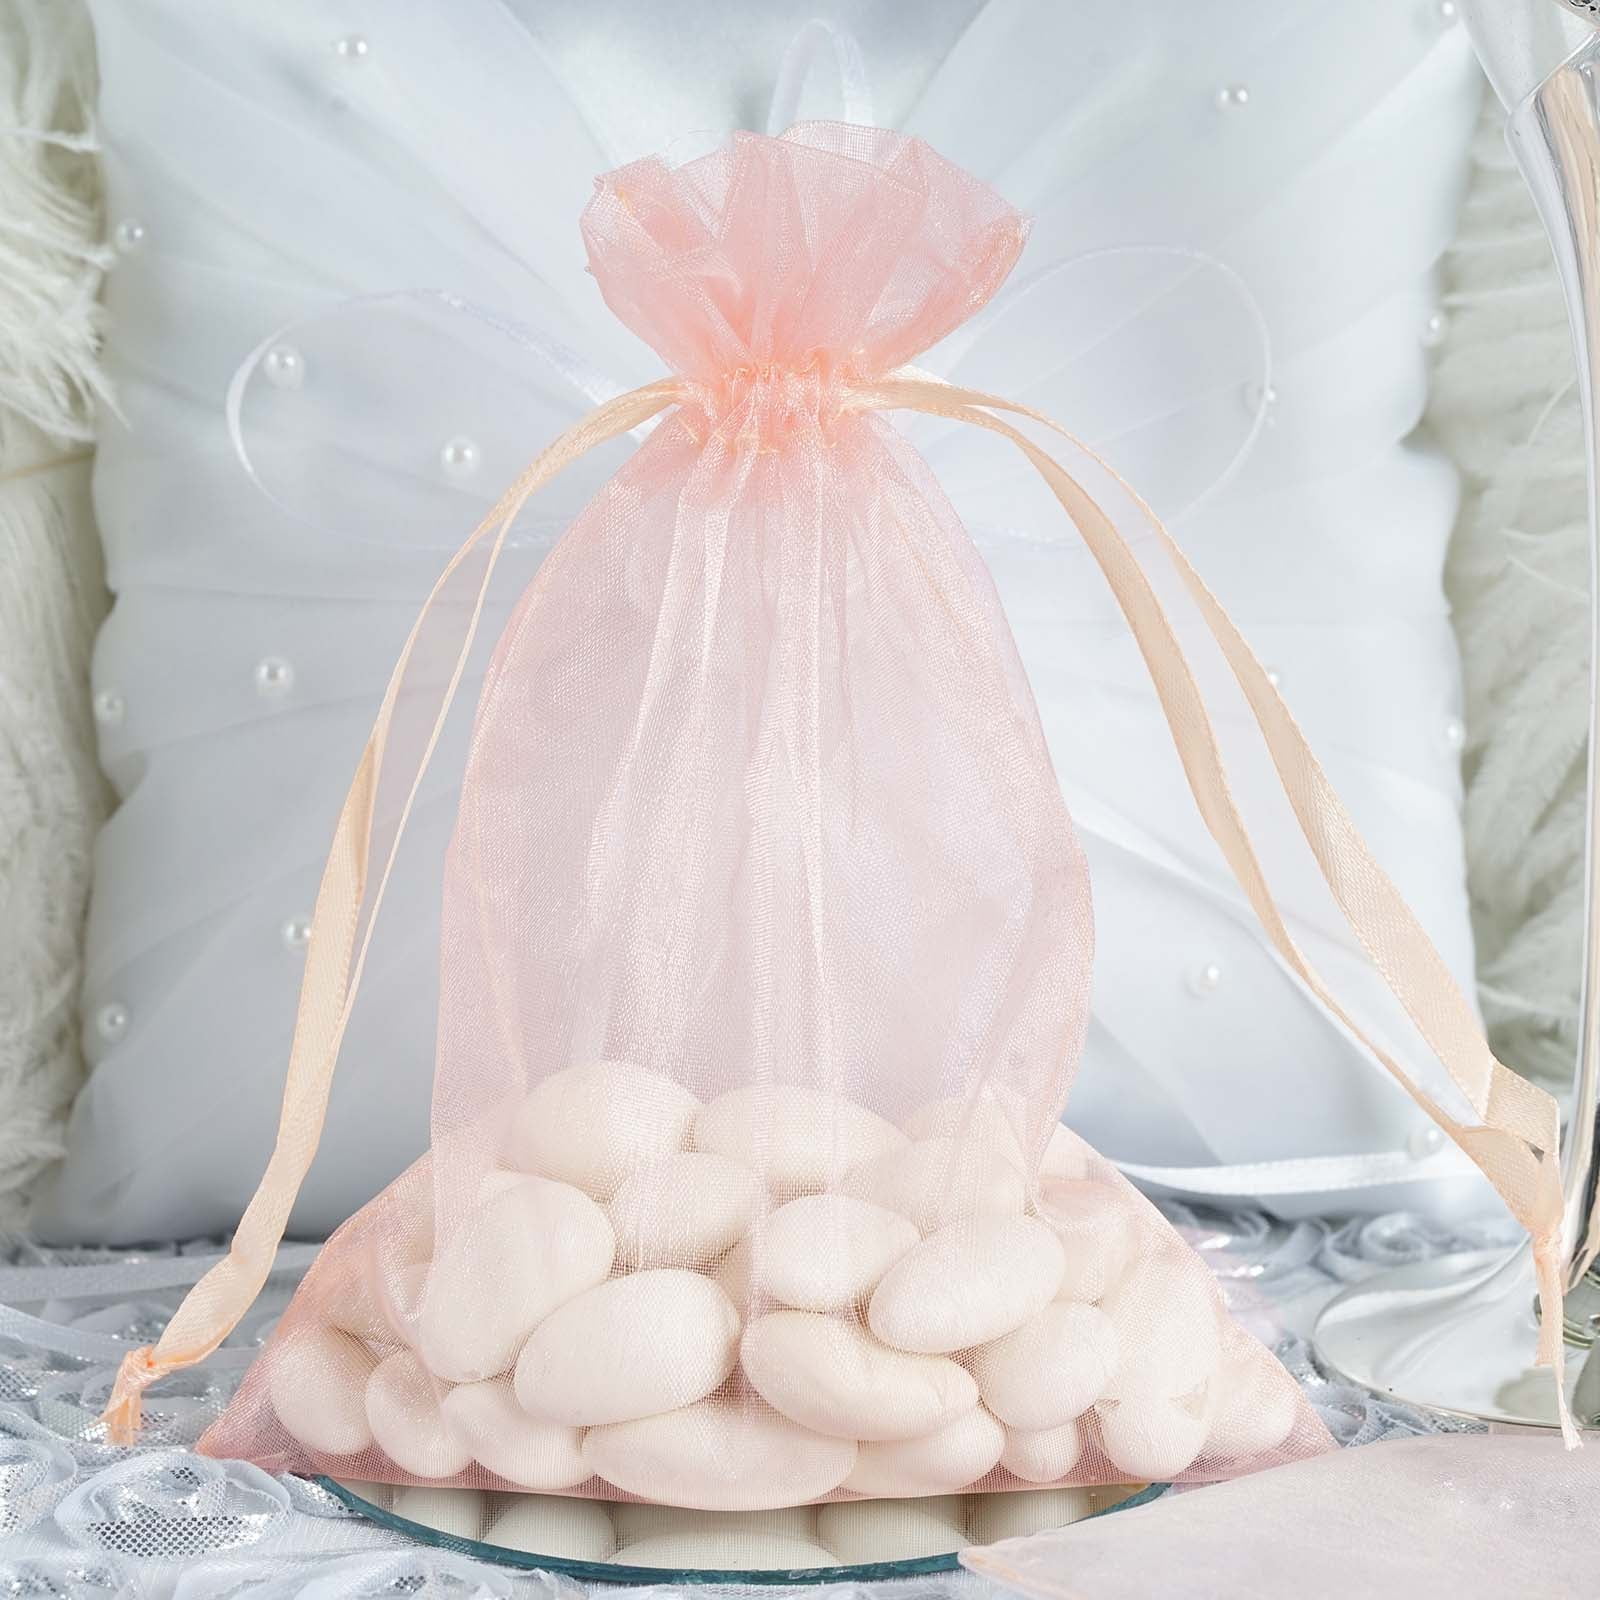 Candy BAGS Wedding ORGANZA BAGS Party Large Small Gift Bag Jewellery Pouch 50pcs 